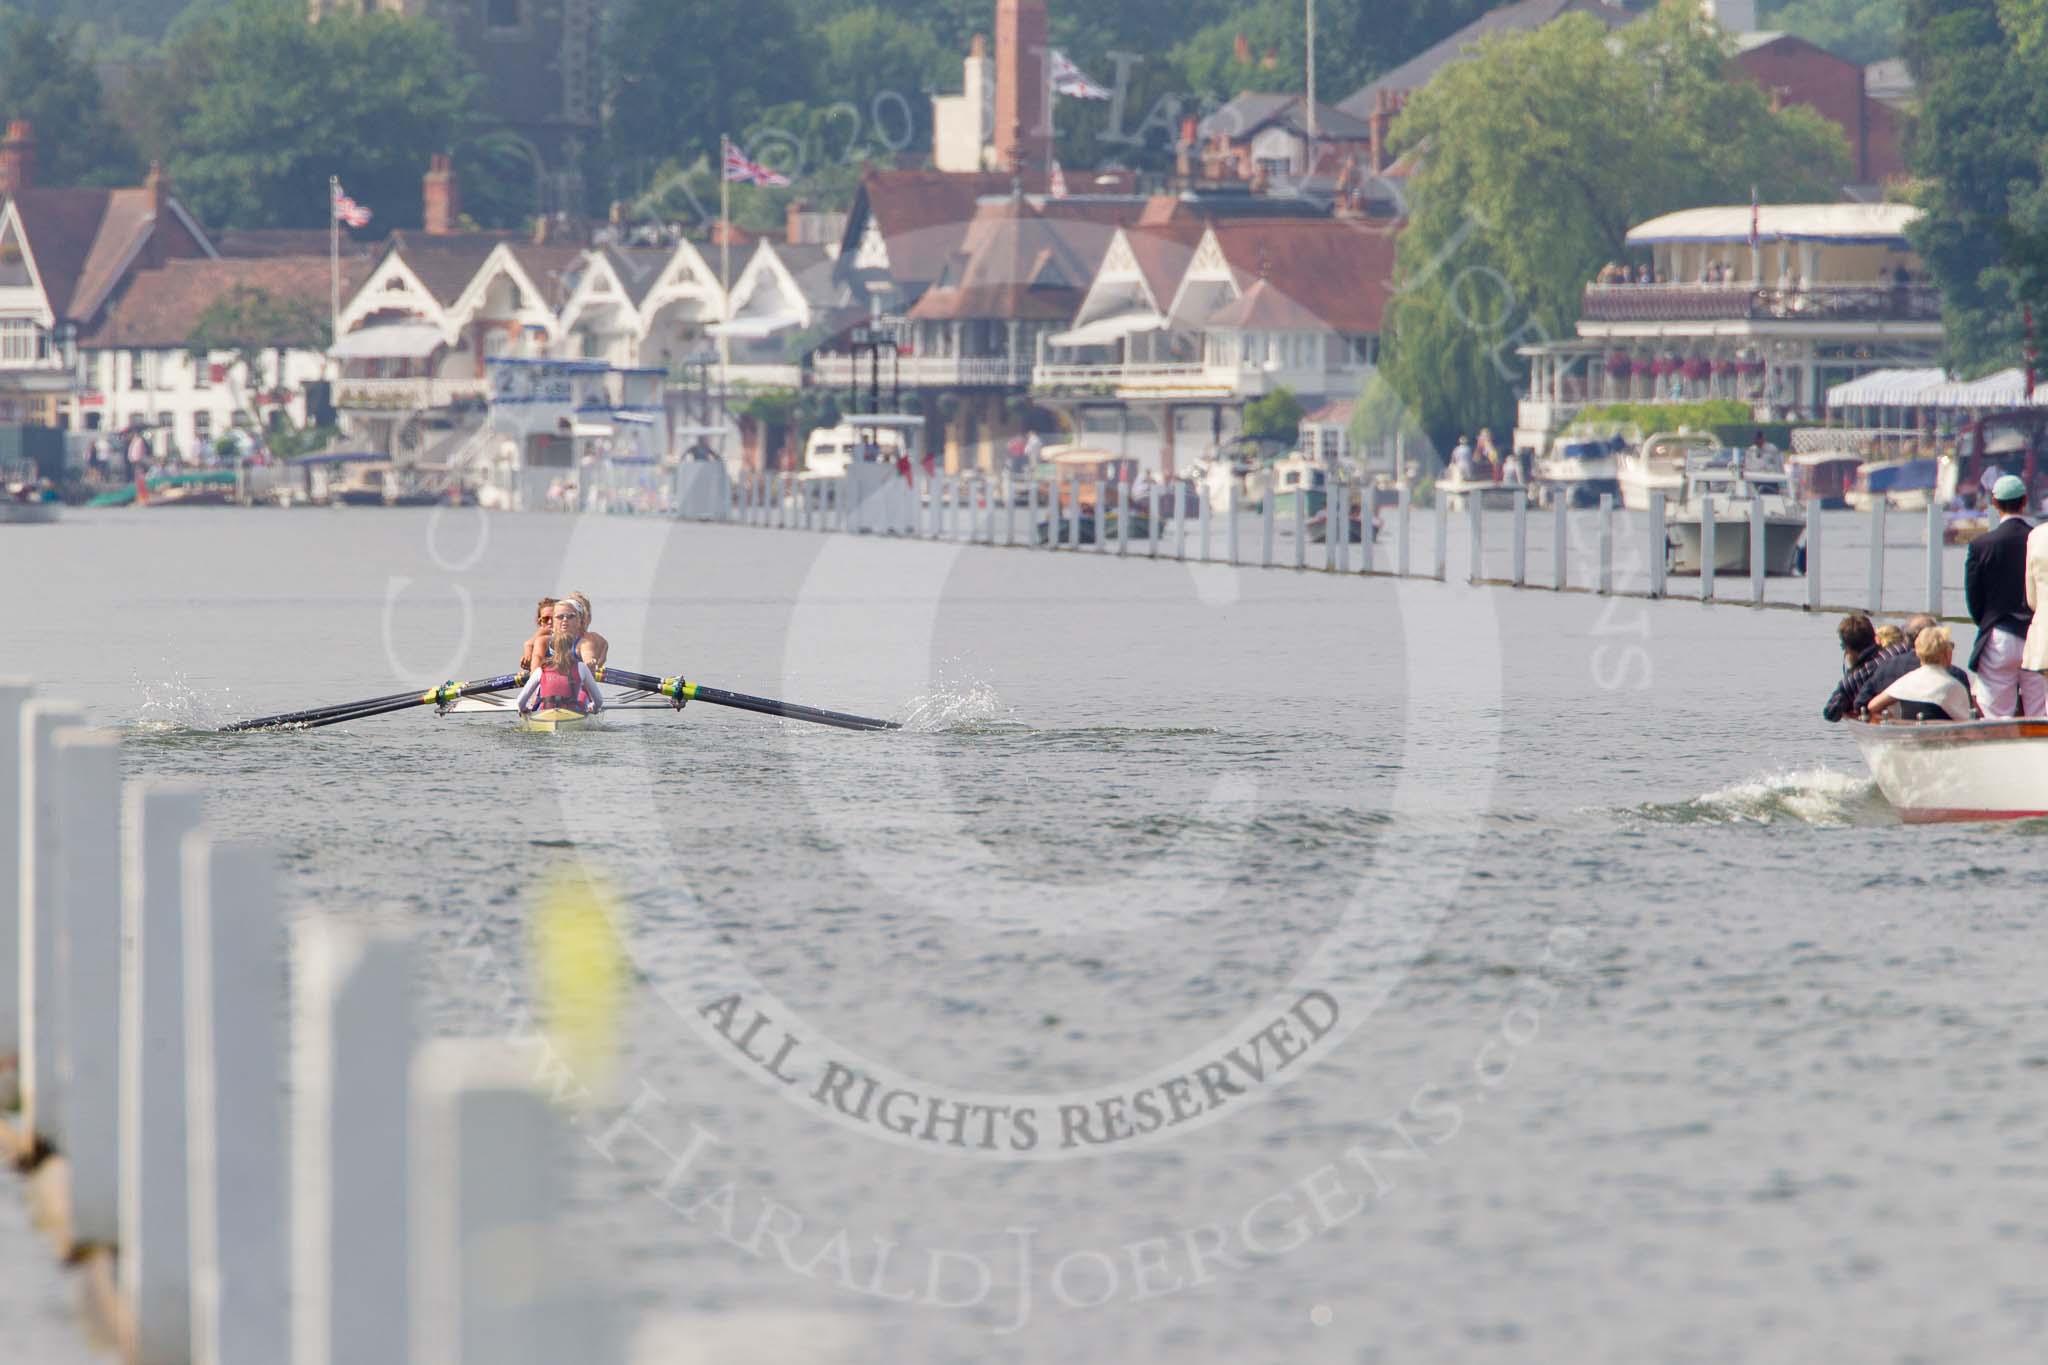 Henley Royal Regatta 2013, Saturday: Race No. 4 for the Remenham Challenge Cup, Molesey Boat Club v Tees Rowing Club and Agecroft Rowing Club. Image #149, 06 July 2013 10:44 River Thames, Henley on Thames, UK